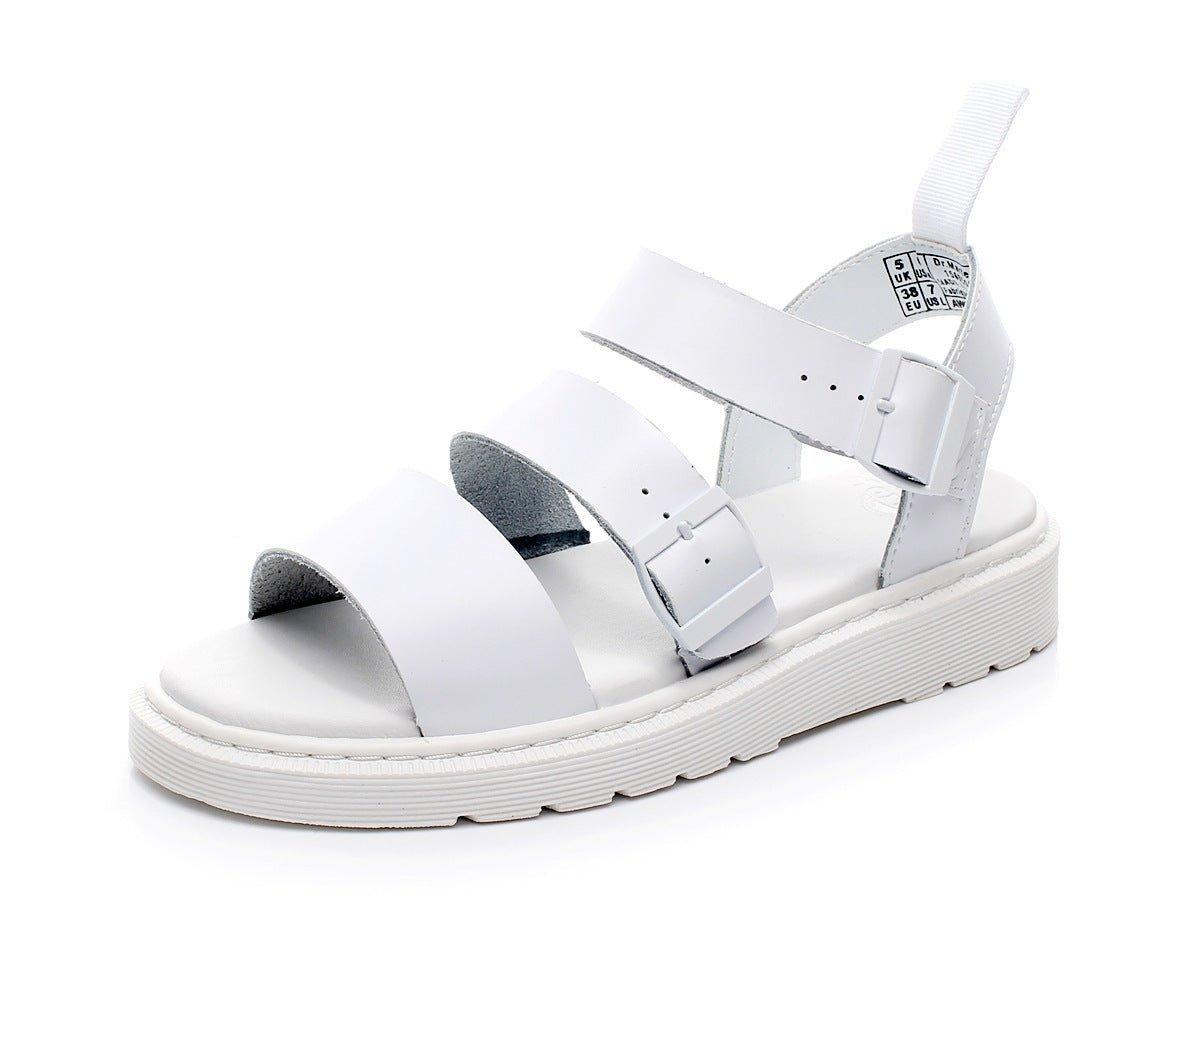 Martin Sandals Buckle Beach Shoes Platform Sandals | MODE BY OH